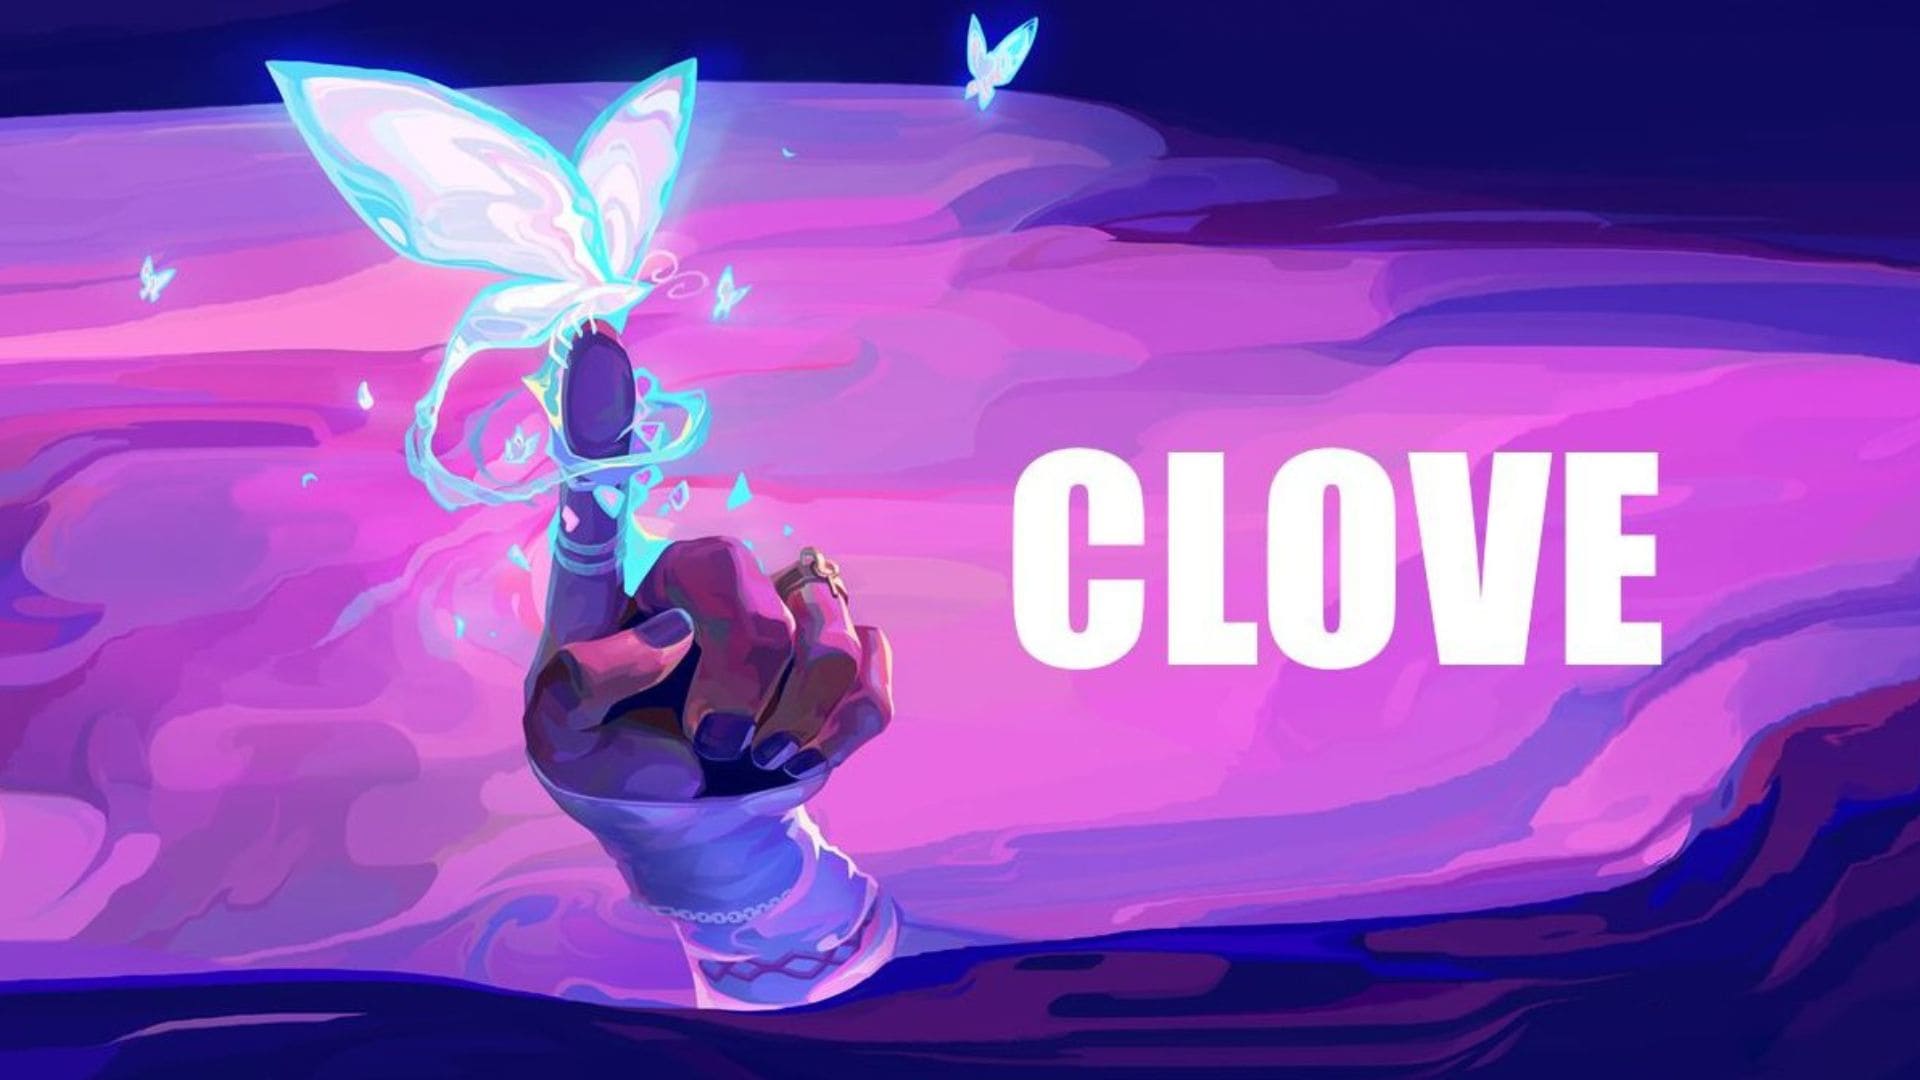 Clove graphic with agent's name and hand holding butterflies